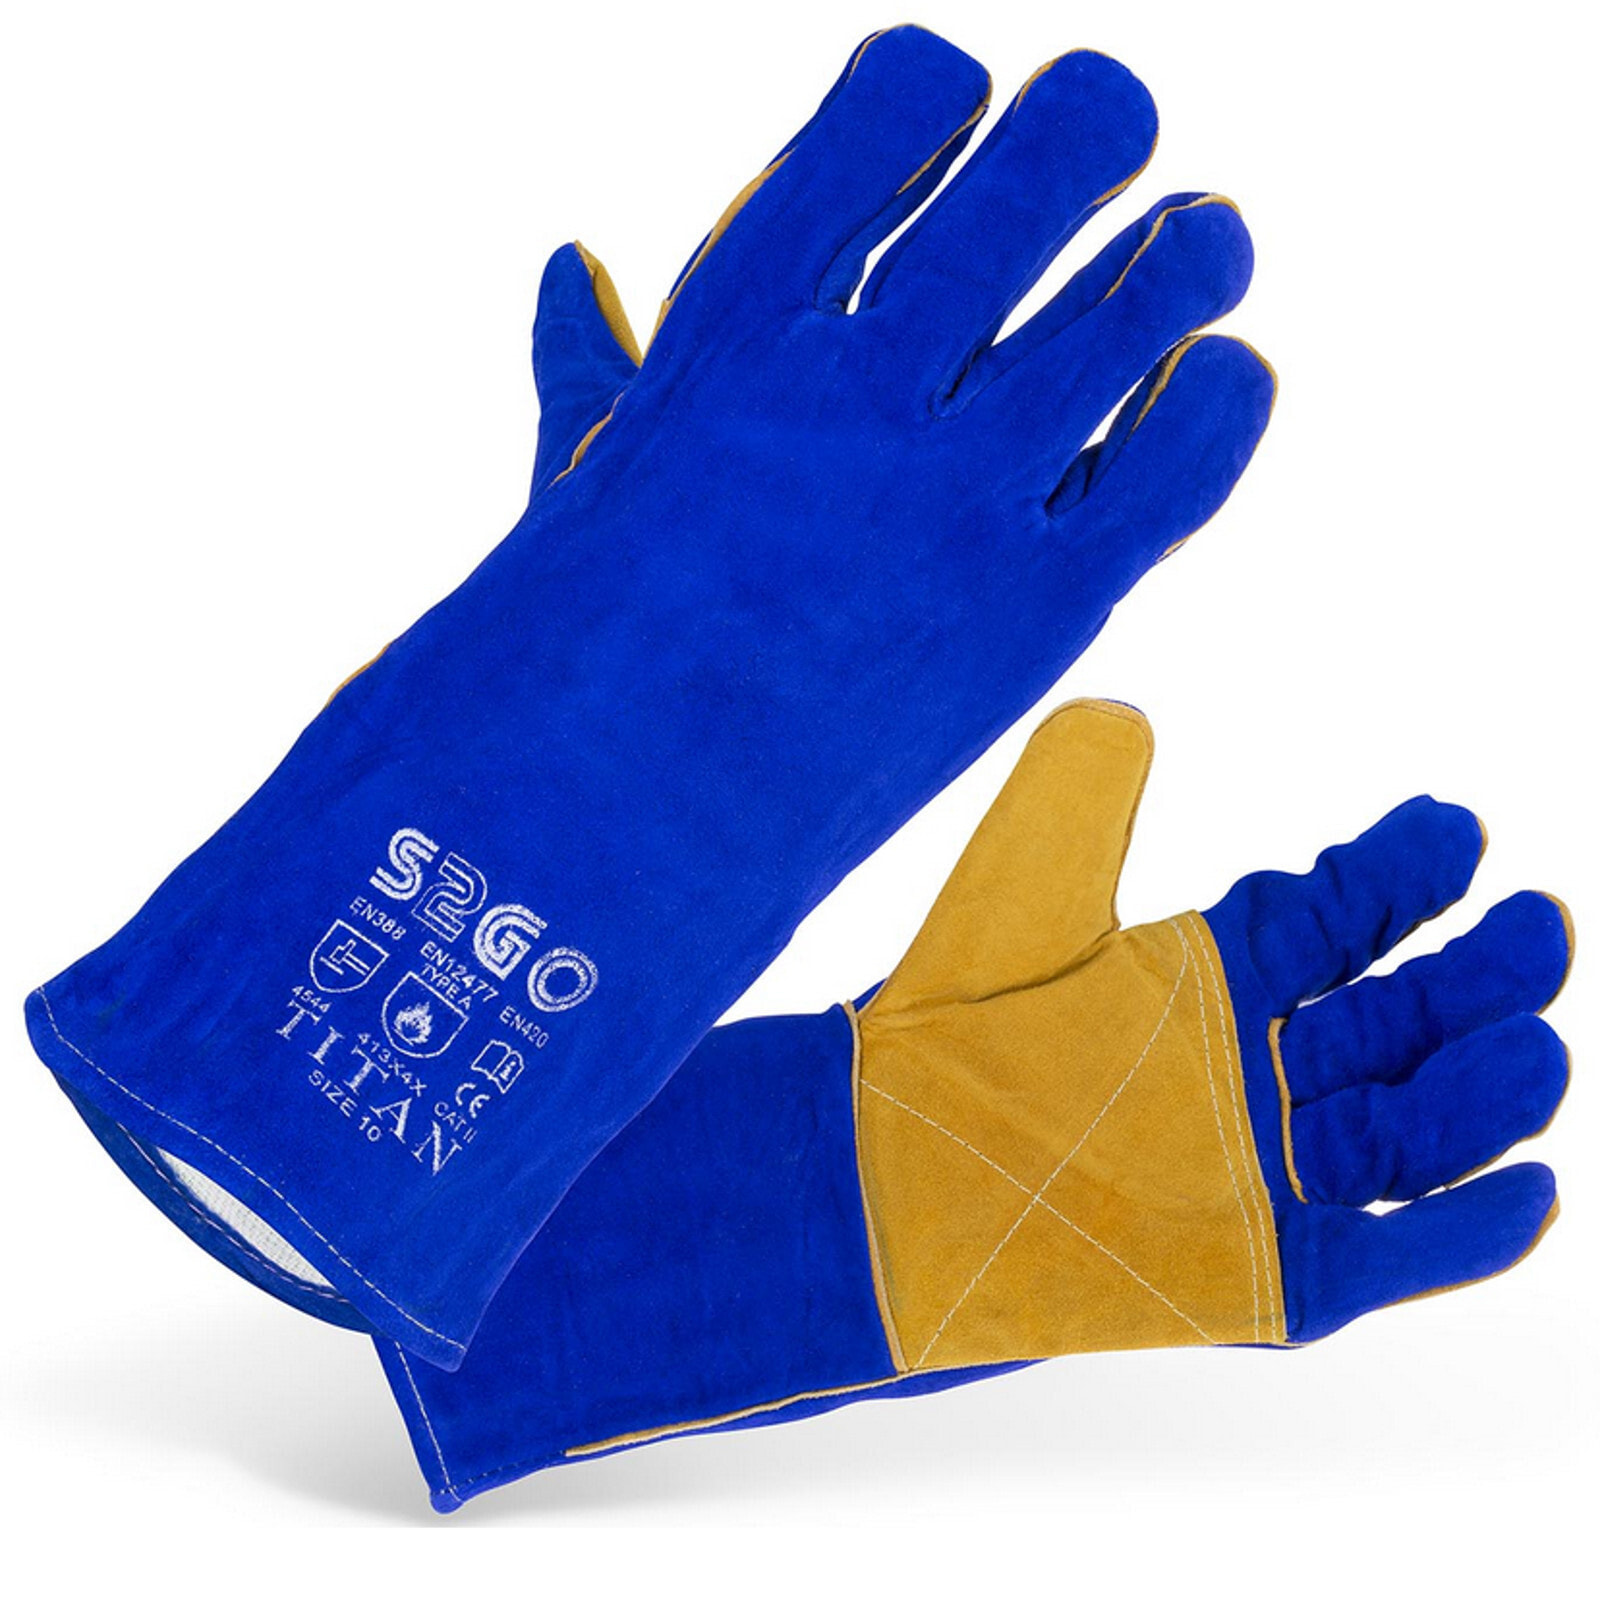 Welding protective work gloves made of cowhide, blue